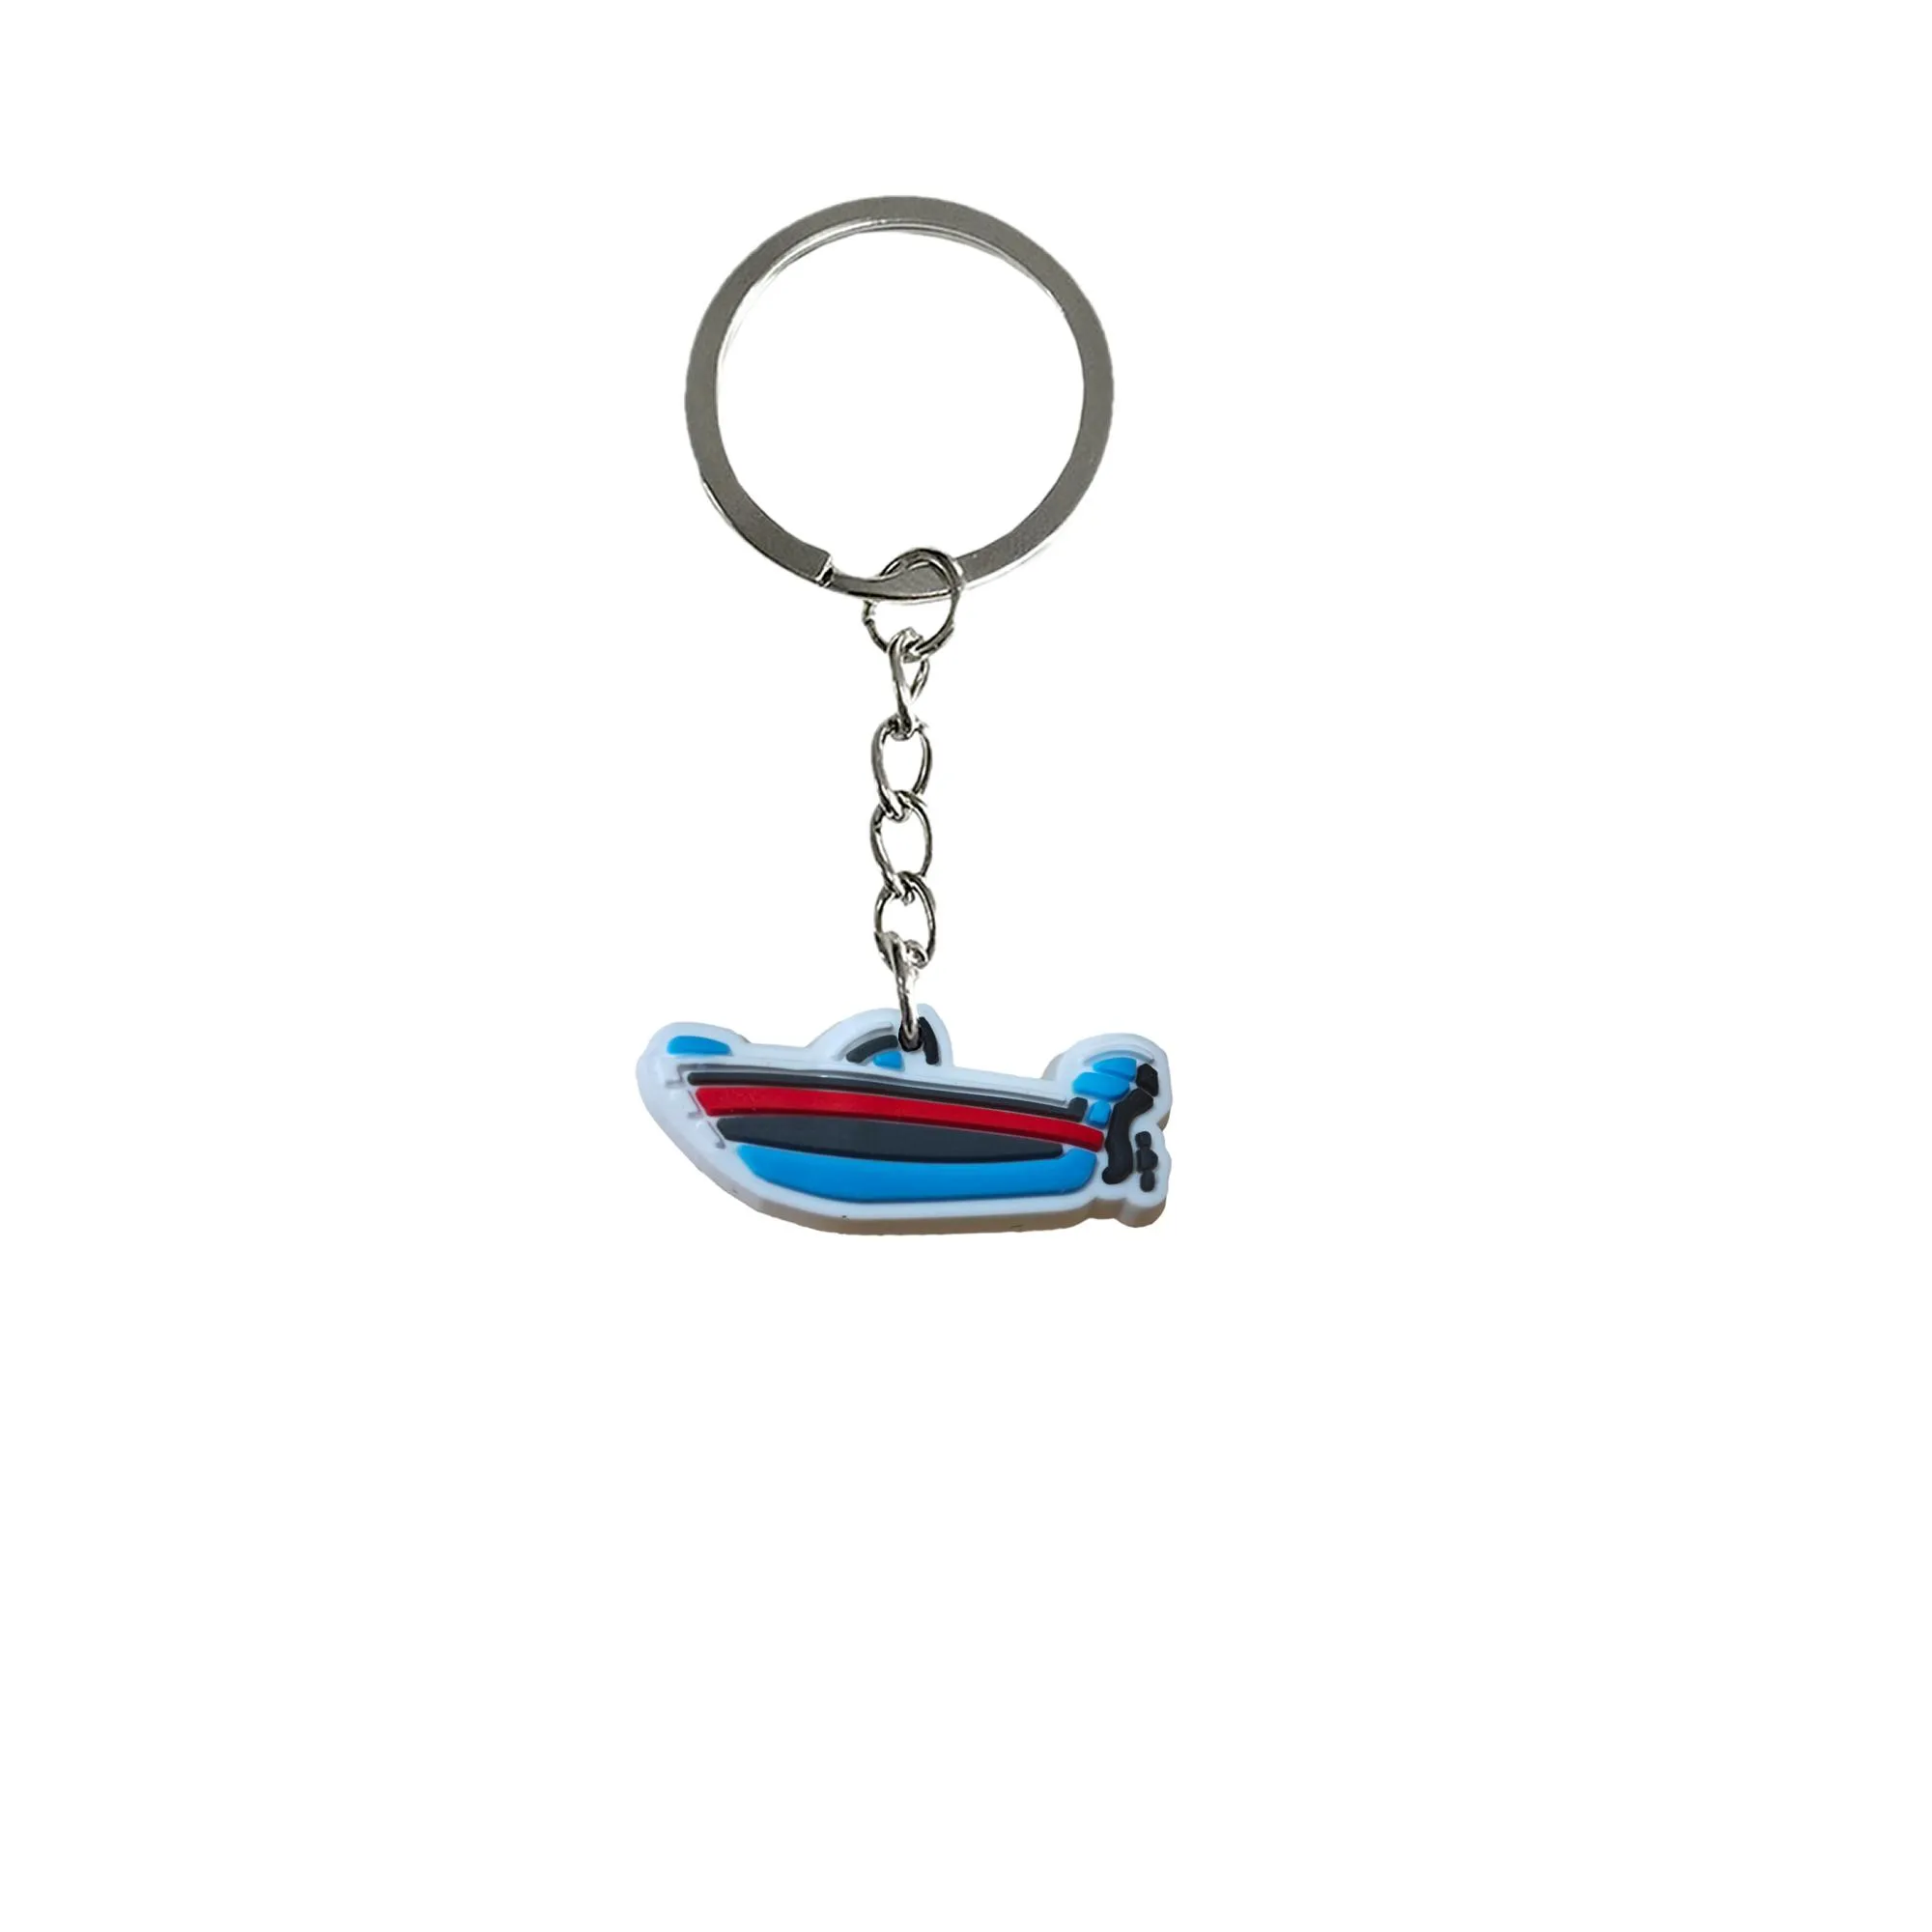 fishing tools 2 keychain keychains for childrens party favors goodie bag stuffers supplies classroom prizes keyring suitable schoolbag cute silicone key chain adult gift school day birthday